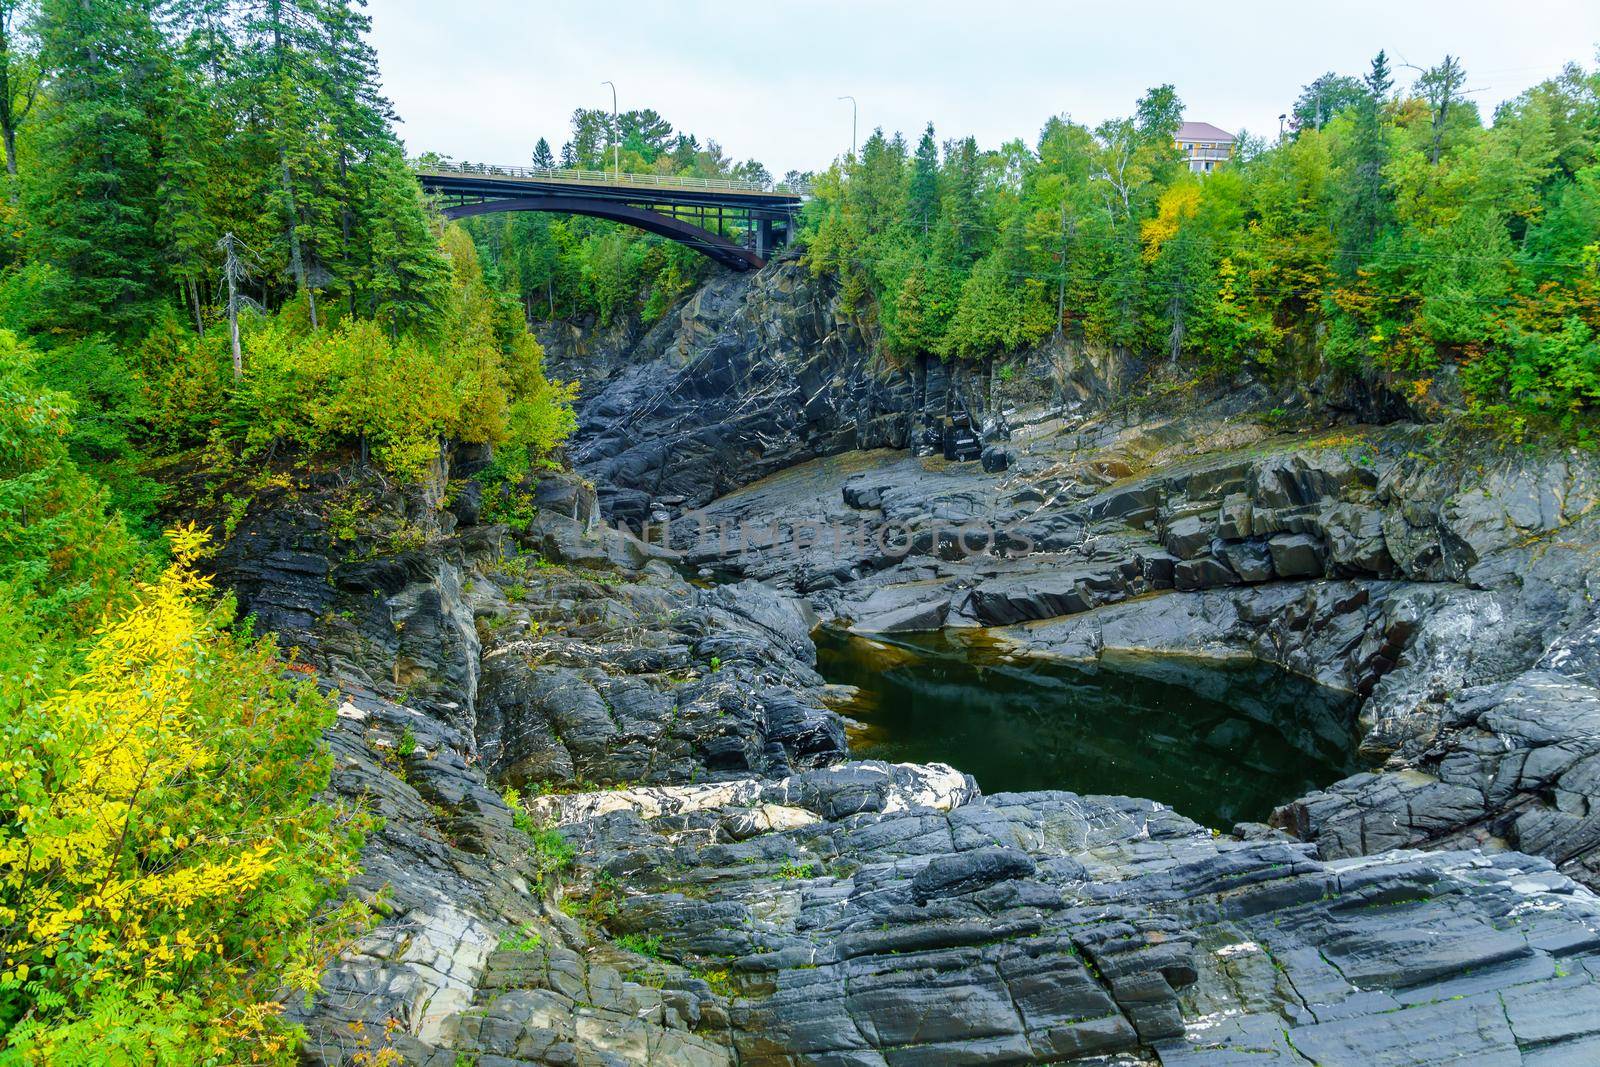 Gorge of the Saint John River in Grand Falls by RnDmS